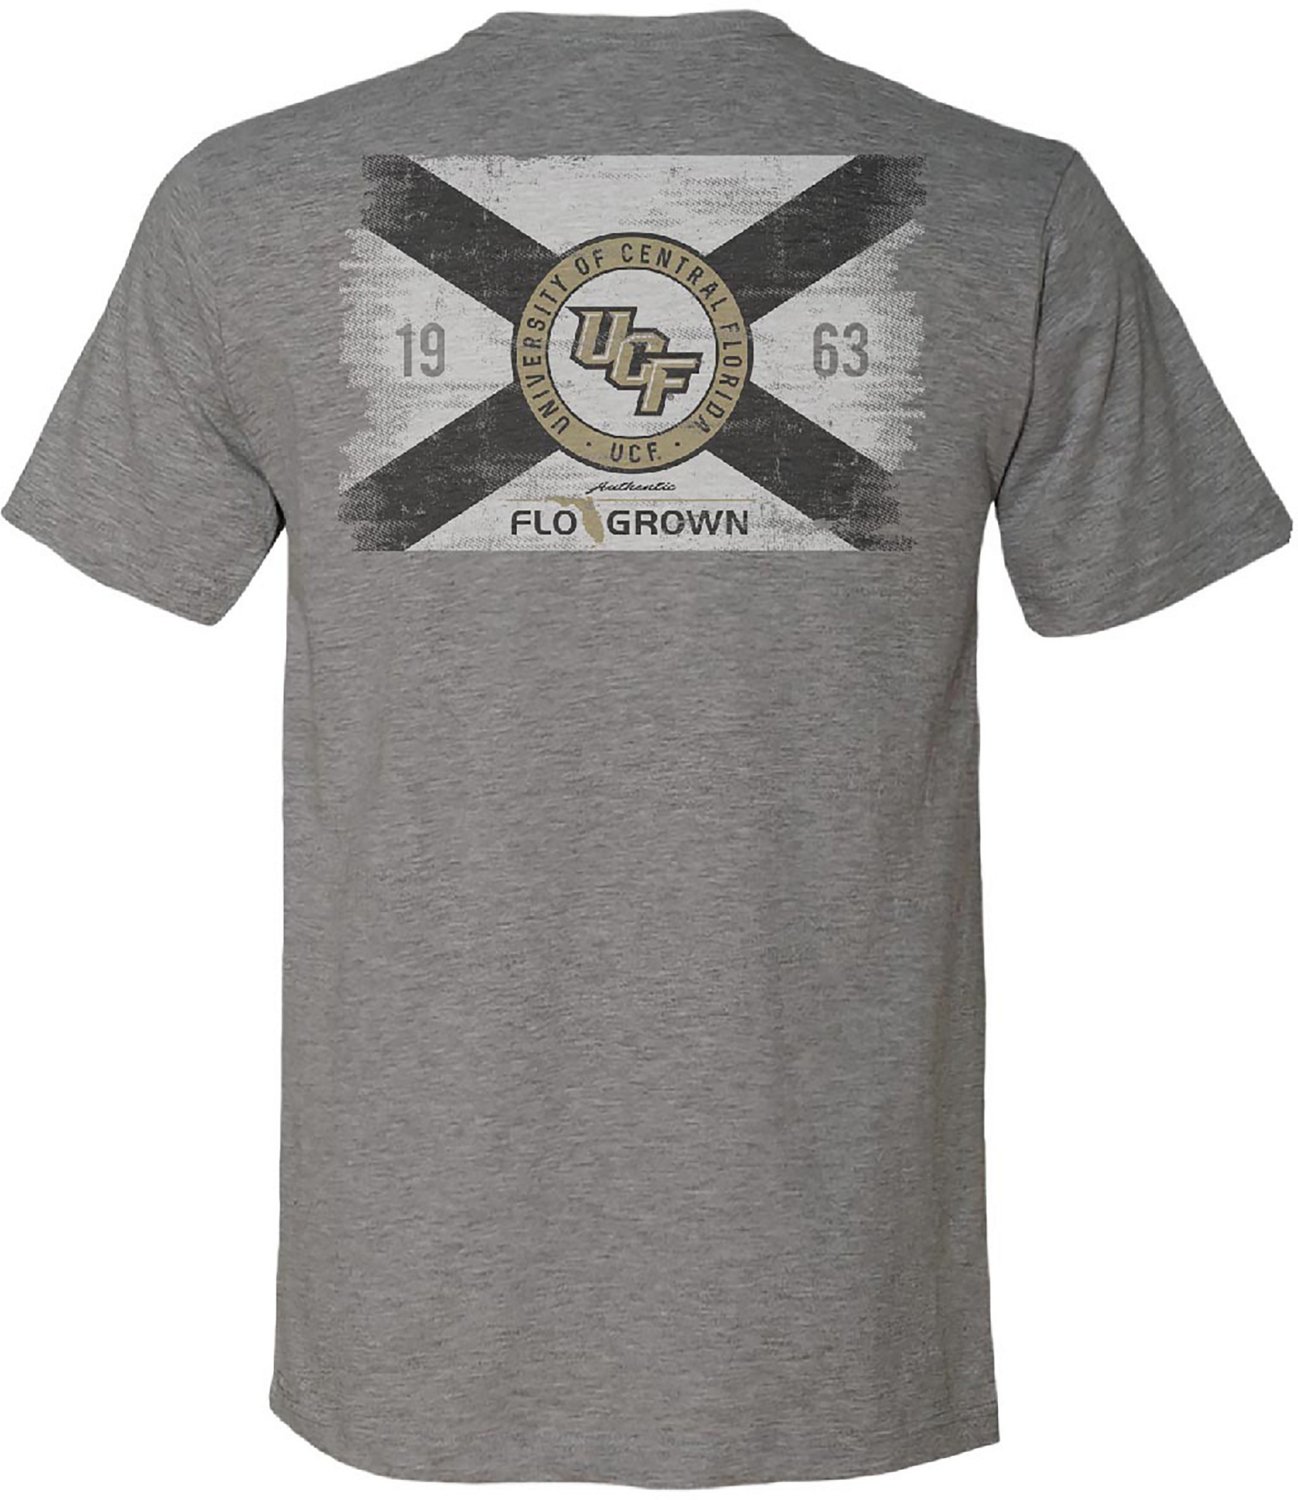 FLOGROWN Men's University of Central Florida Washed Flag Graphic T ...